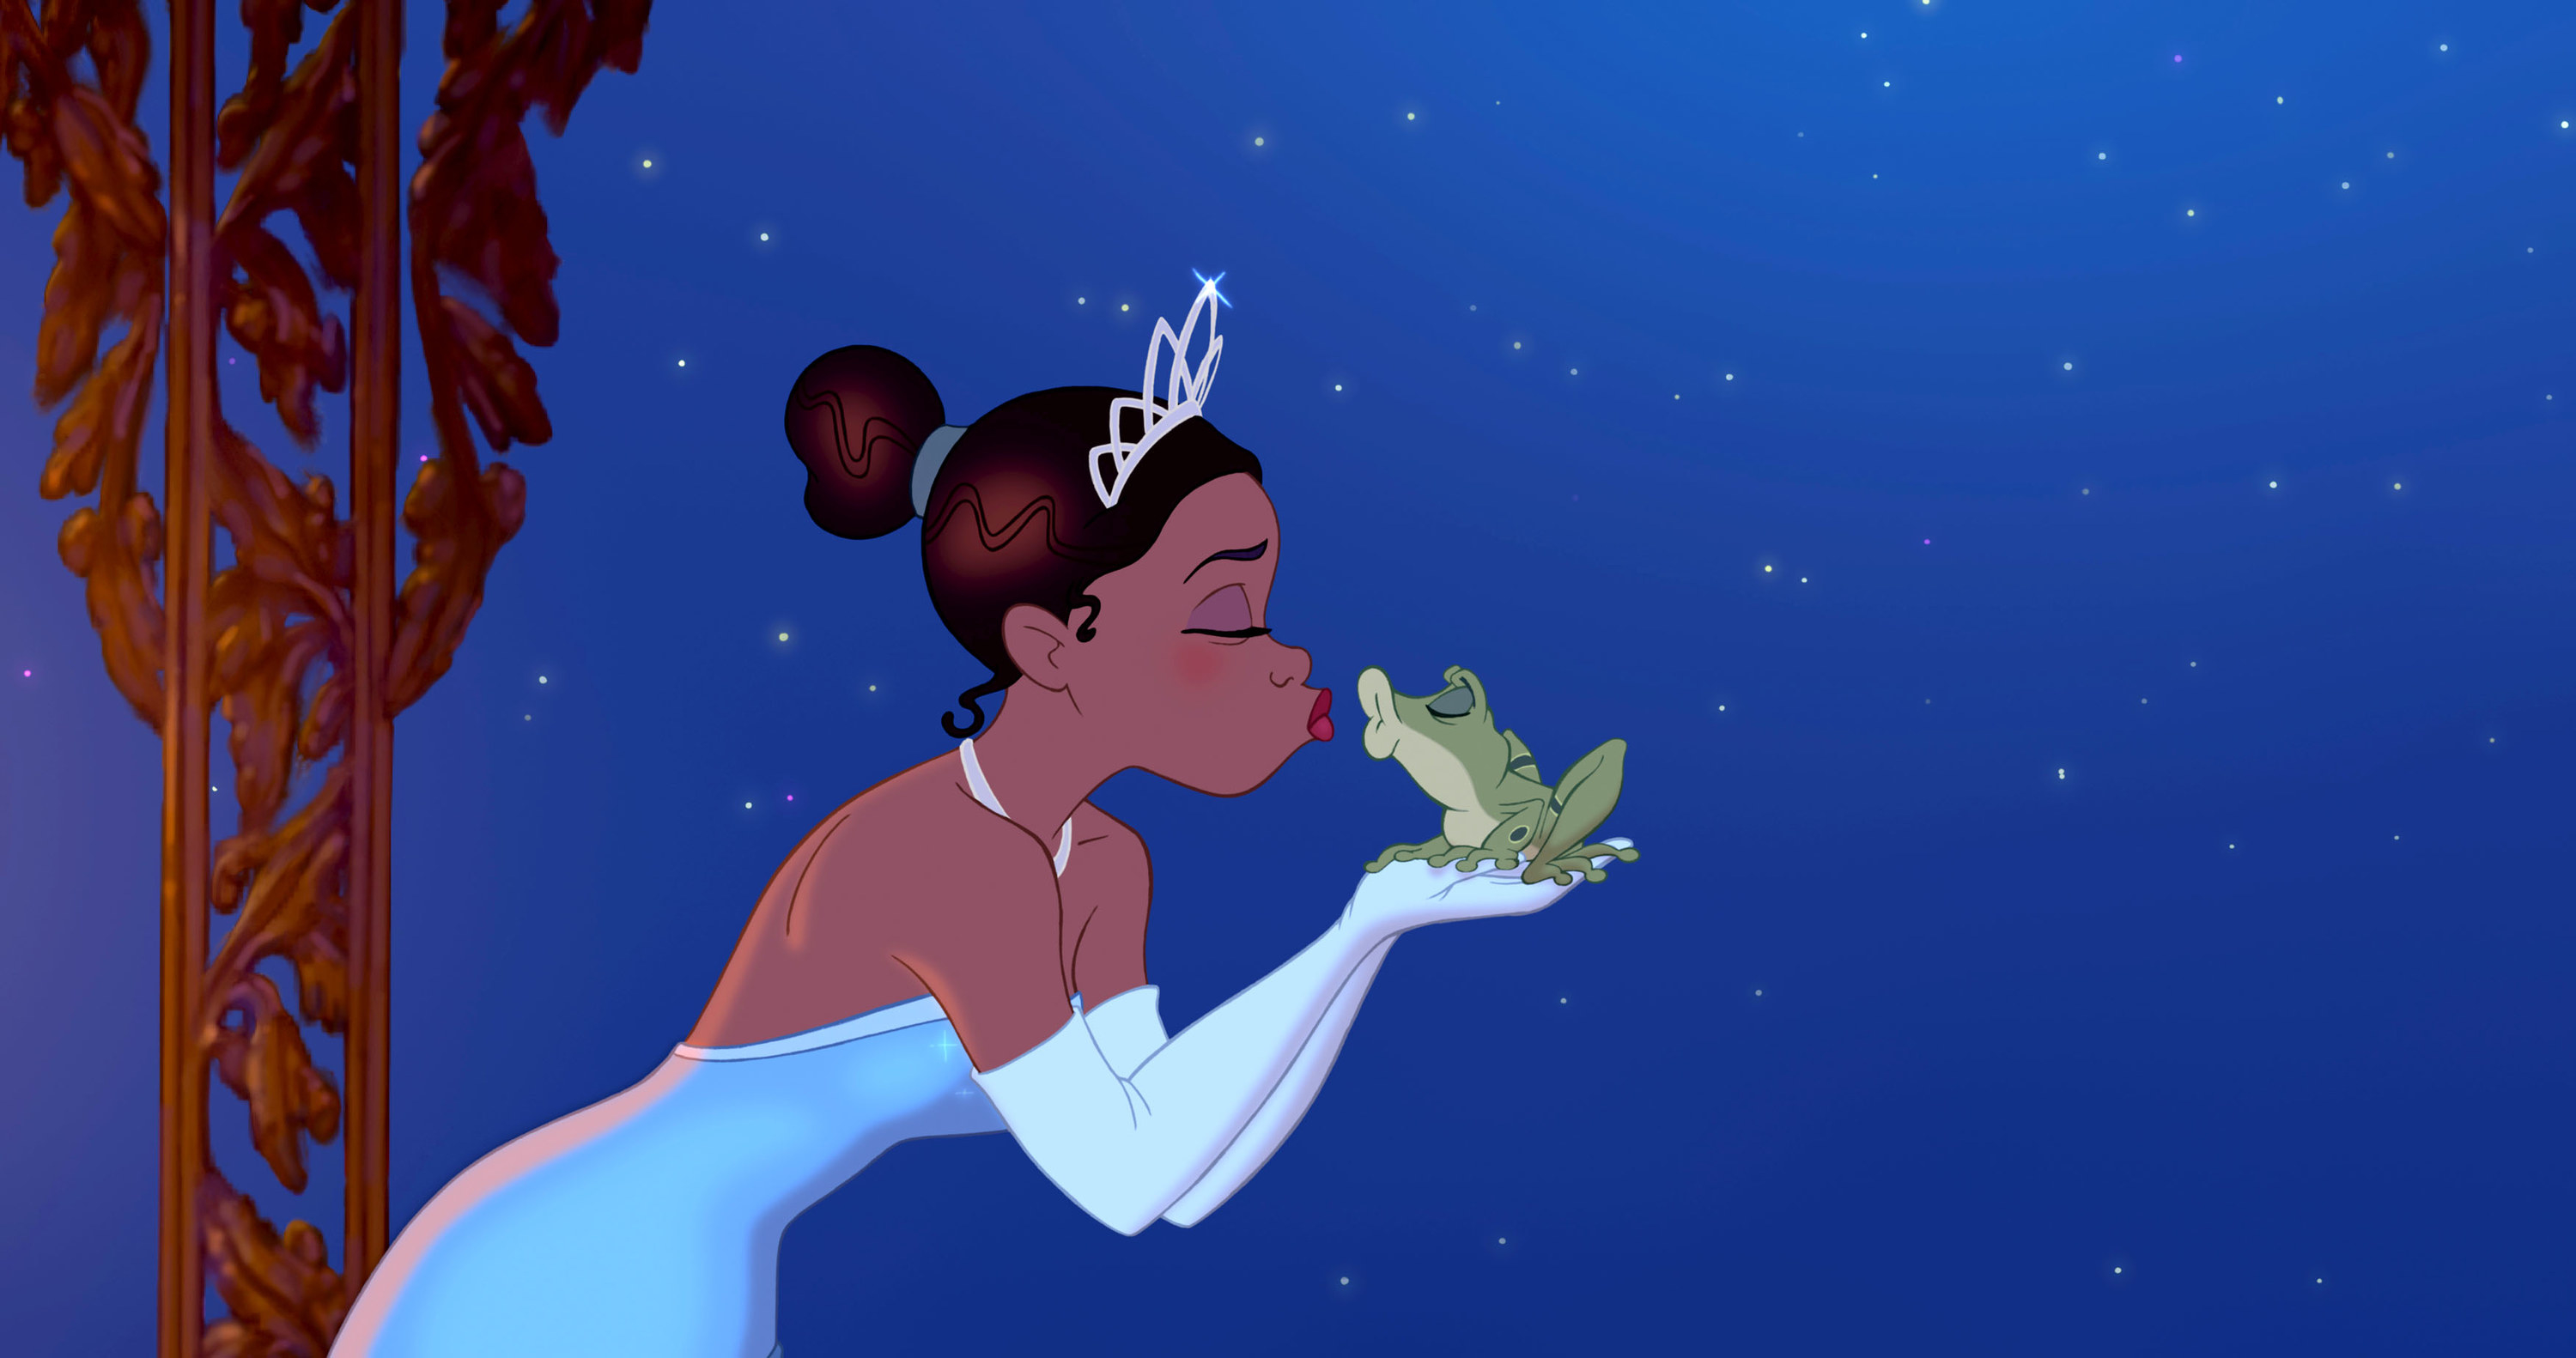 Tiana from The Princess and the Frog puckering her lips to kiss Prince Naveen in his frog form